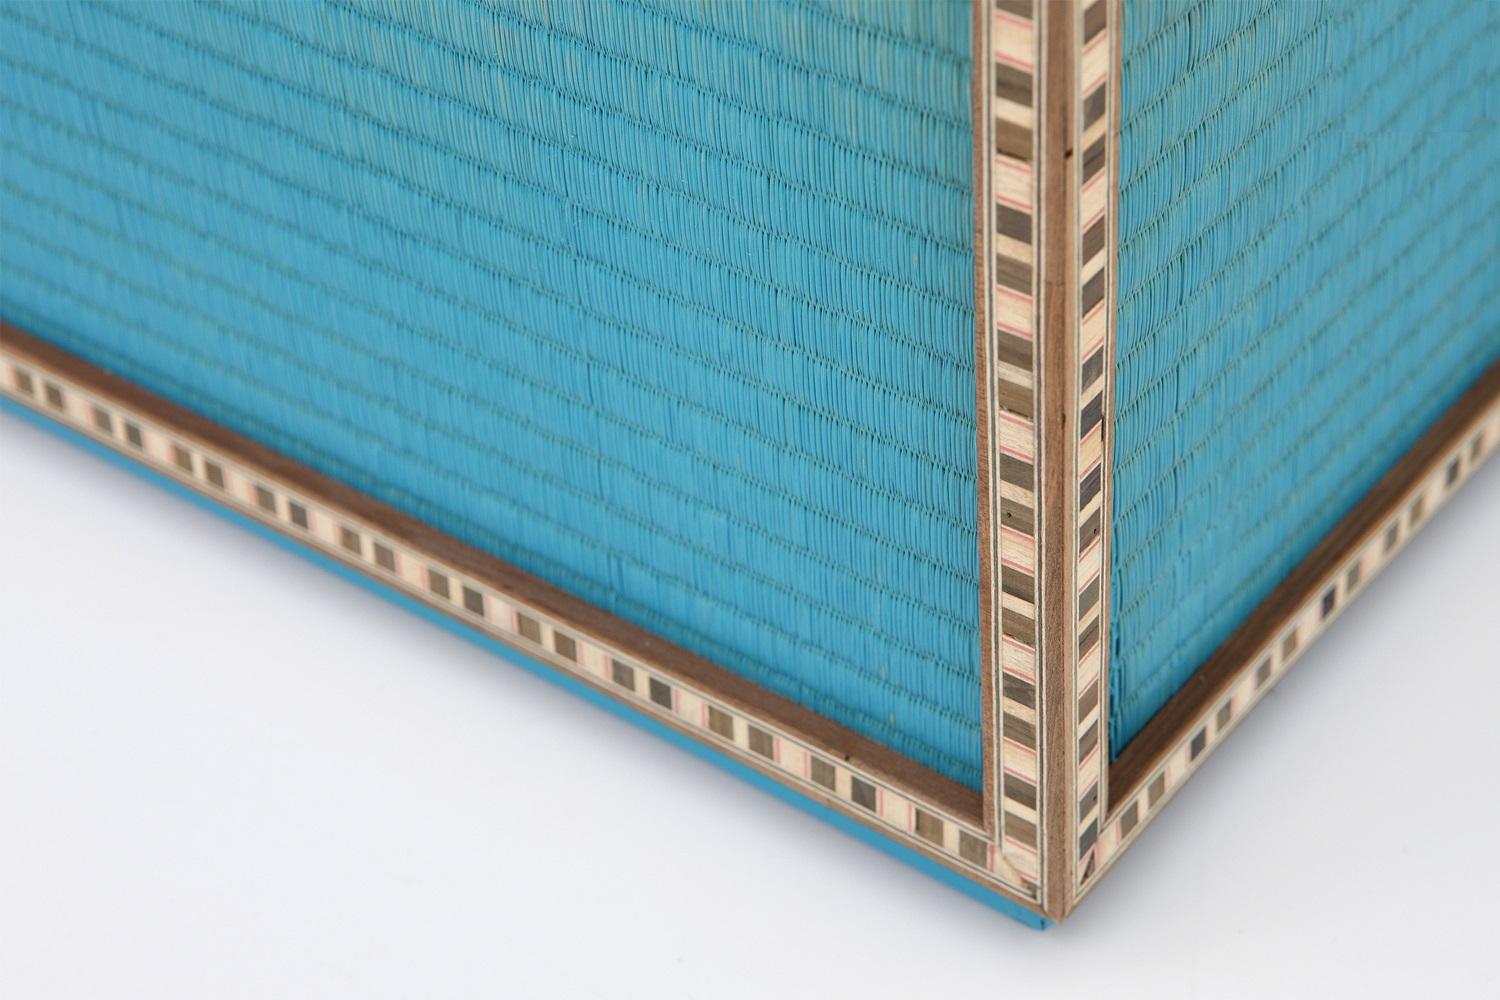 Modern Tatami Tables, Japanese Straw Weaving with Eastern Marquetry For Sale